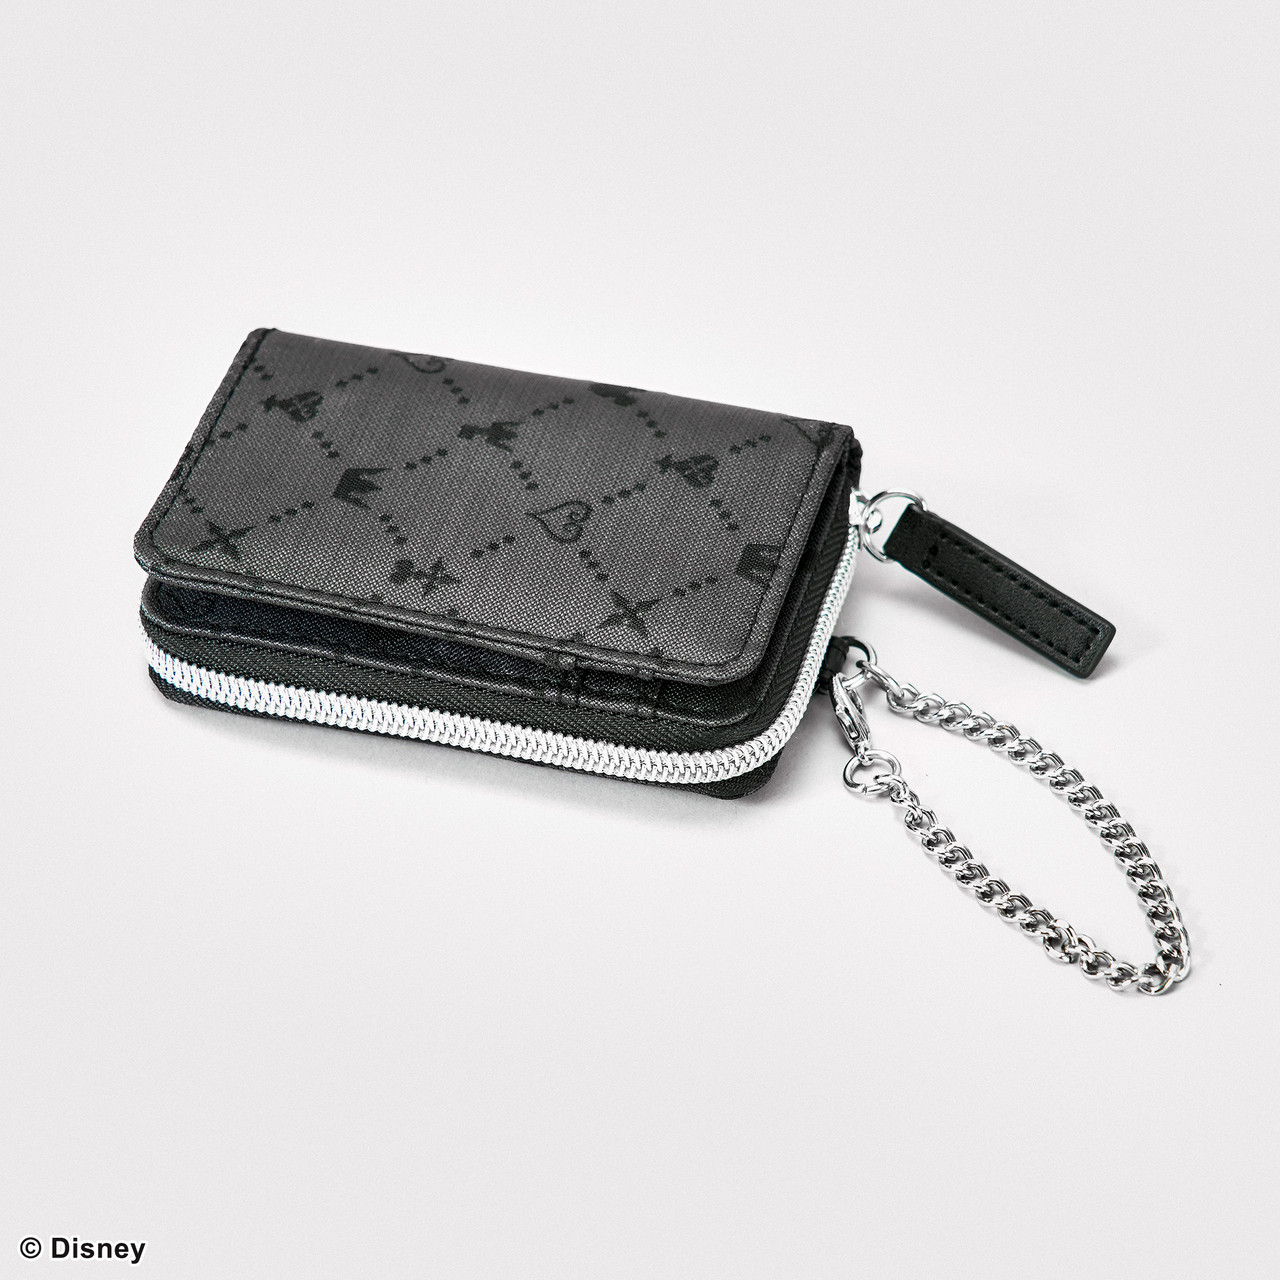 Gucci Key Pouch / Coin Pouch in Signature Leather GG Pattern! Review 